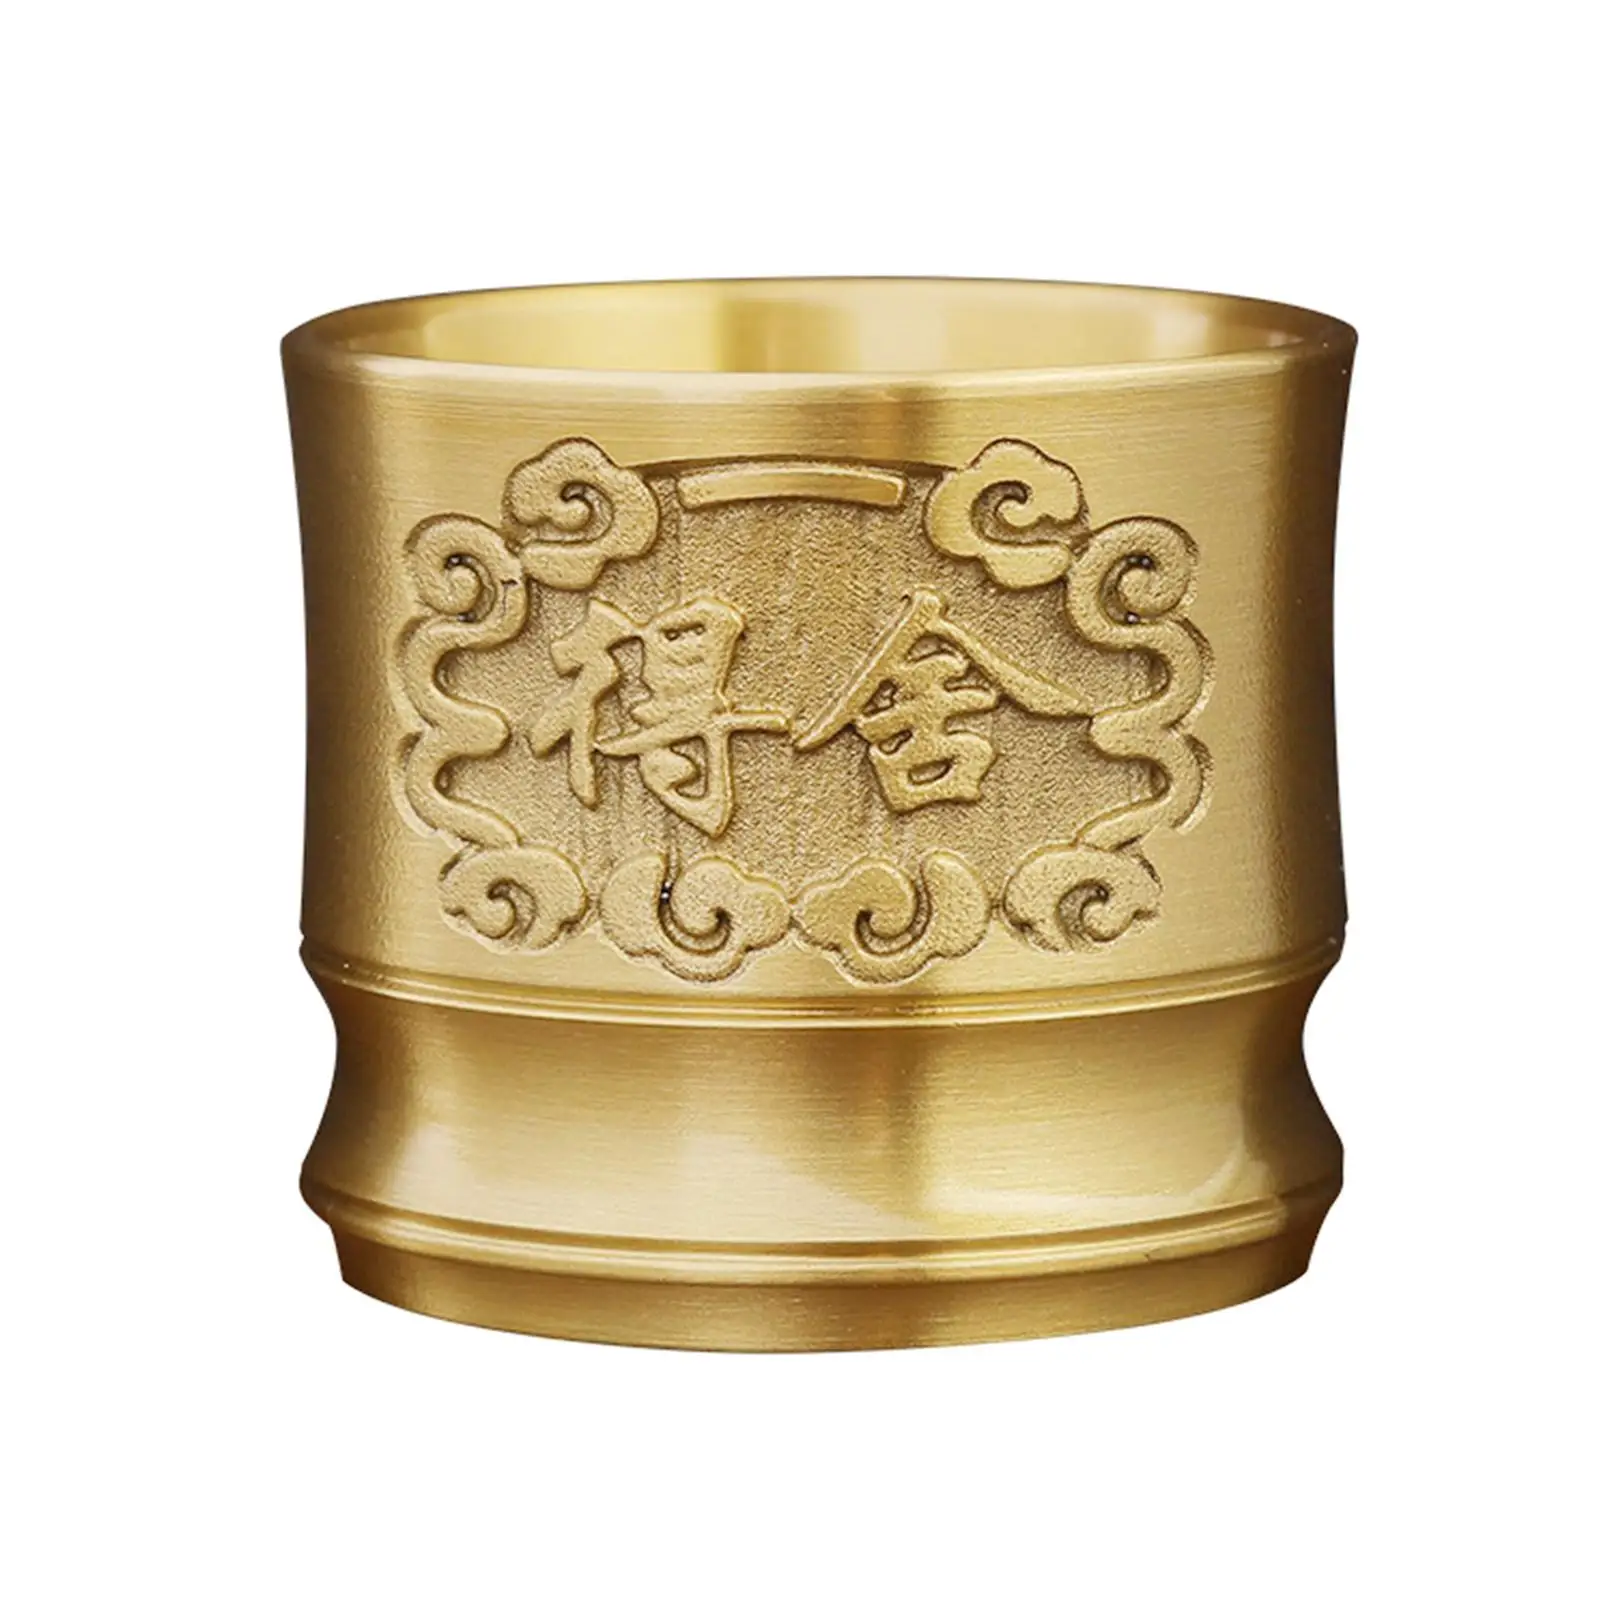 Brass Cup Collection Personal Teacup for Home Desk Decoration